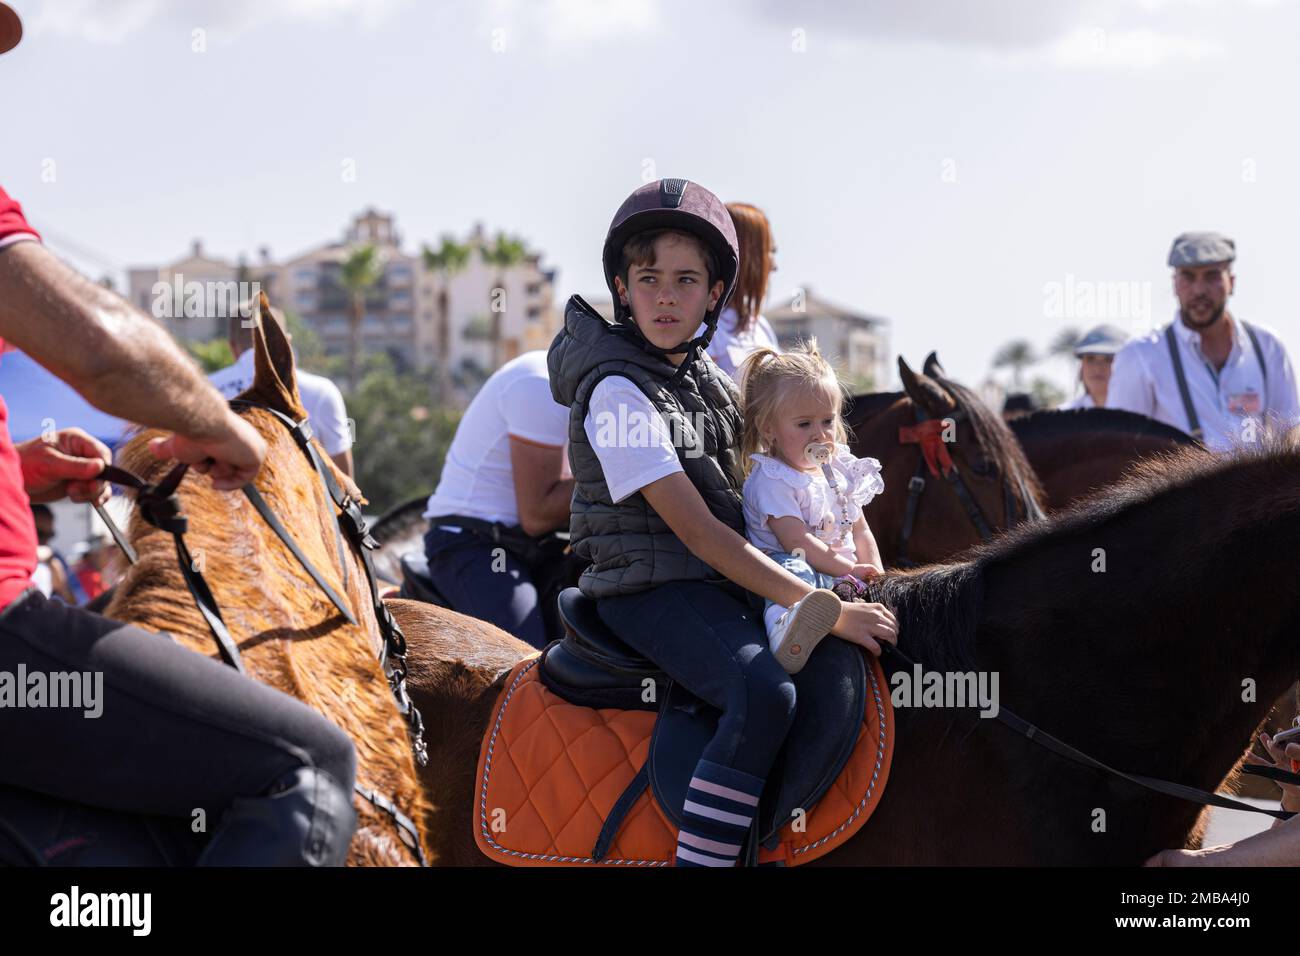 Costa Adeje, Tenerife, Canary Islands, 20 January 2023. Even young babies get on horseback at the fiesta of San Sebastian which returns for the first time since 2020 due to the covid pandemic restrictions. The annual fiesta in La Caleta on the Costa Adeje is enjoyed by locals and tourists who gather to see the many horses that come to bathe in the sea at the Playa Enramada beach. Credit: Phil Crean A/Alamy Live News Stock Photo